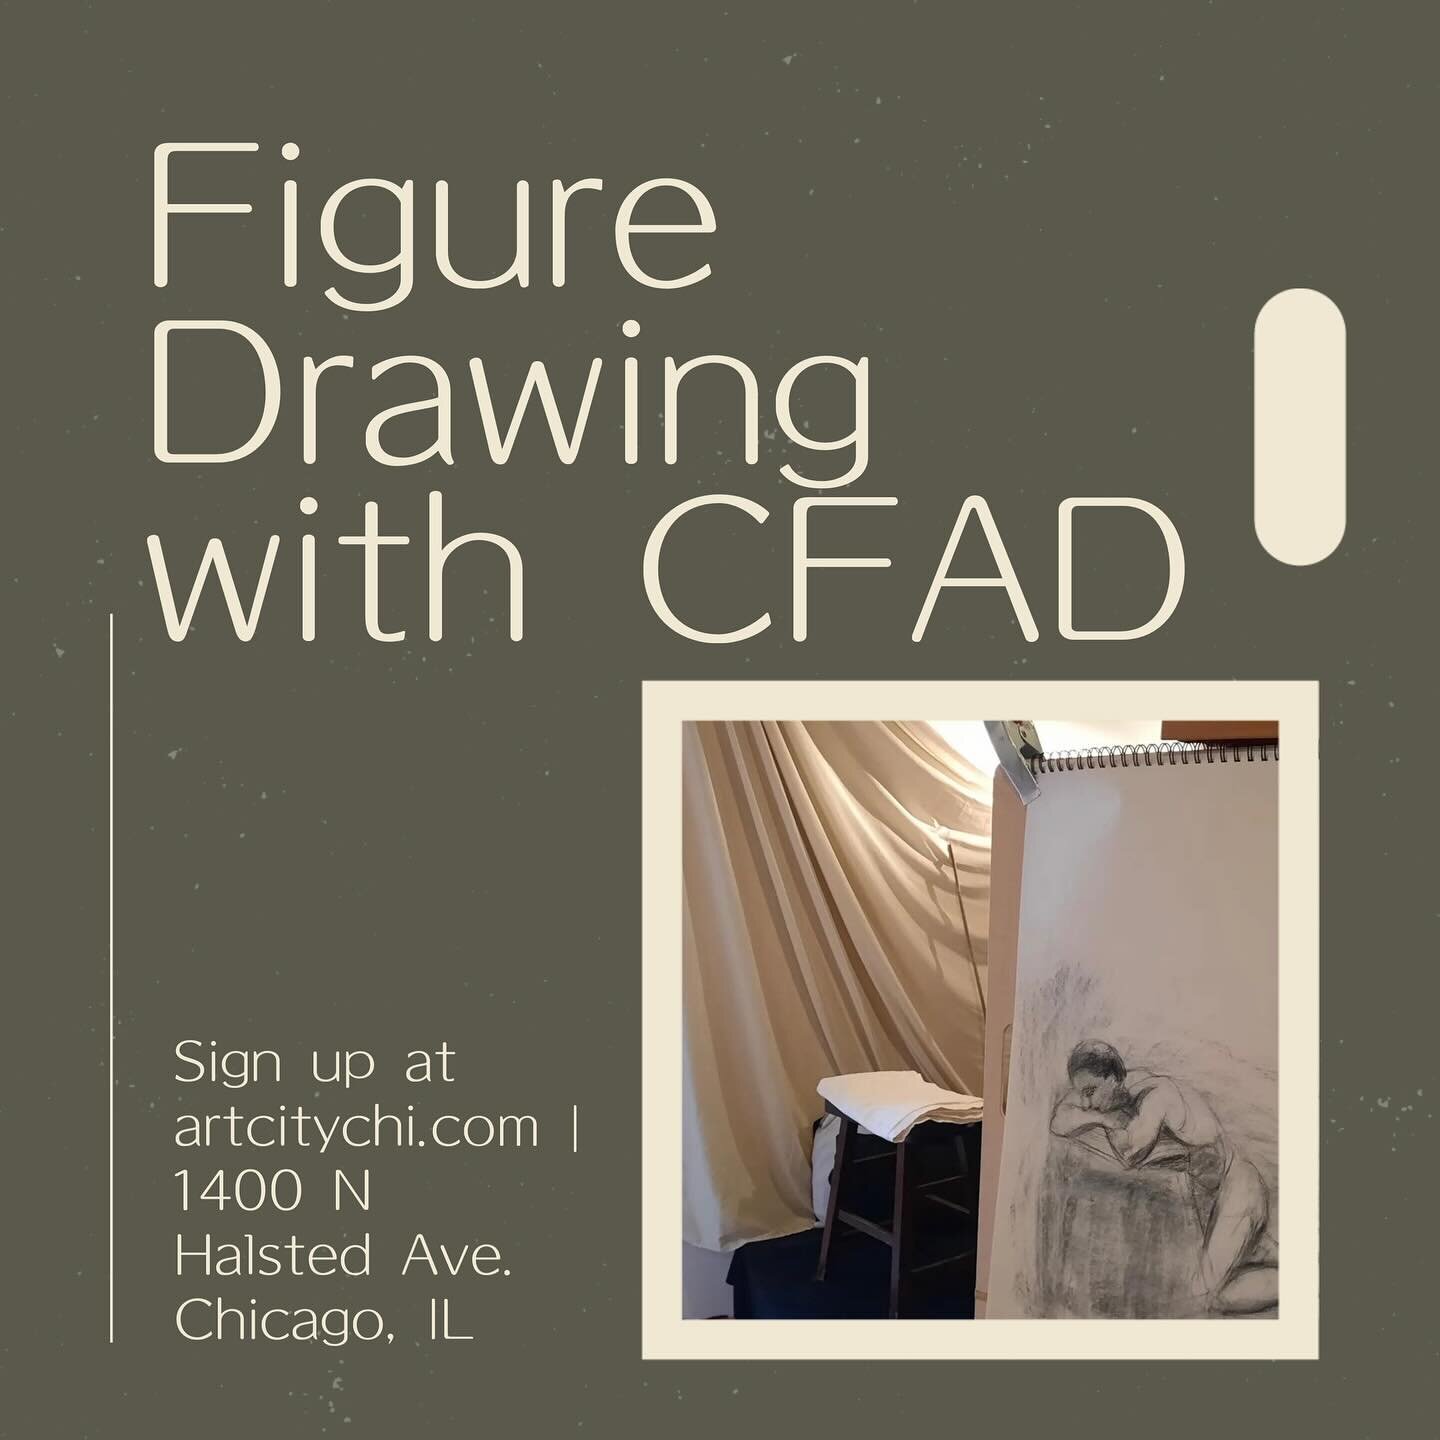 Come join us for a figure drawing session! 👩&zwj;🎨

We&rsquo;re now offering figure drawing classes at our secondary location at 1400 N. Halsted Ave, Chicago, IL on Tuesdays, Thursdays, and Saturdays! Sign up for a class through artcitychi.com unde